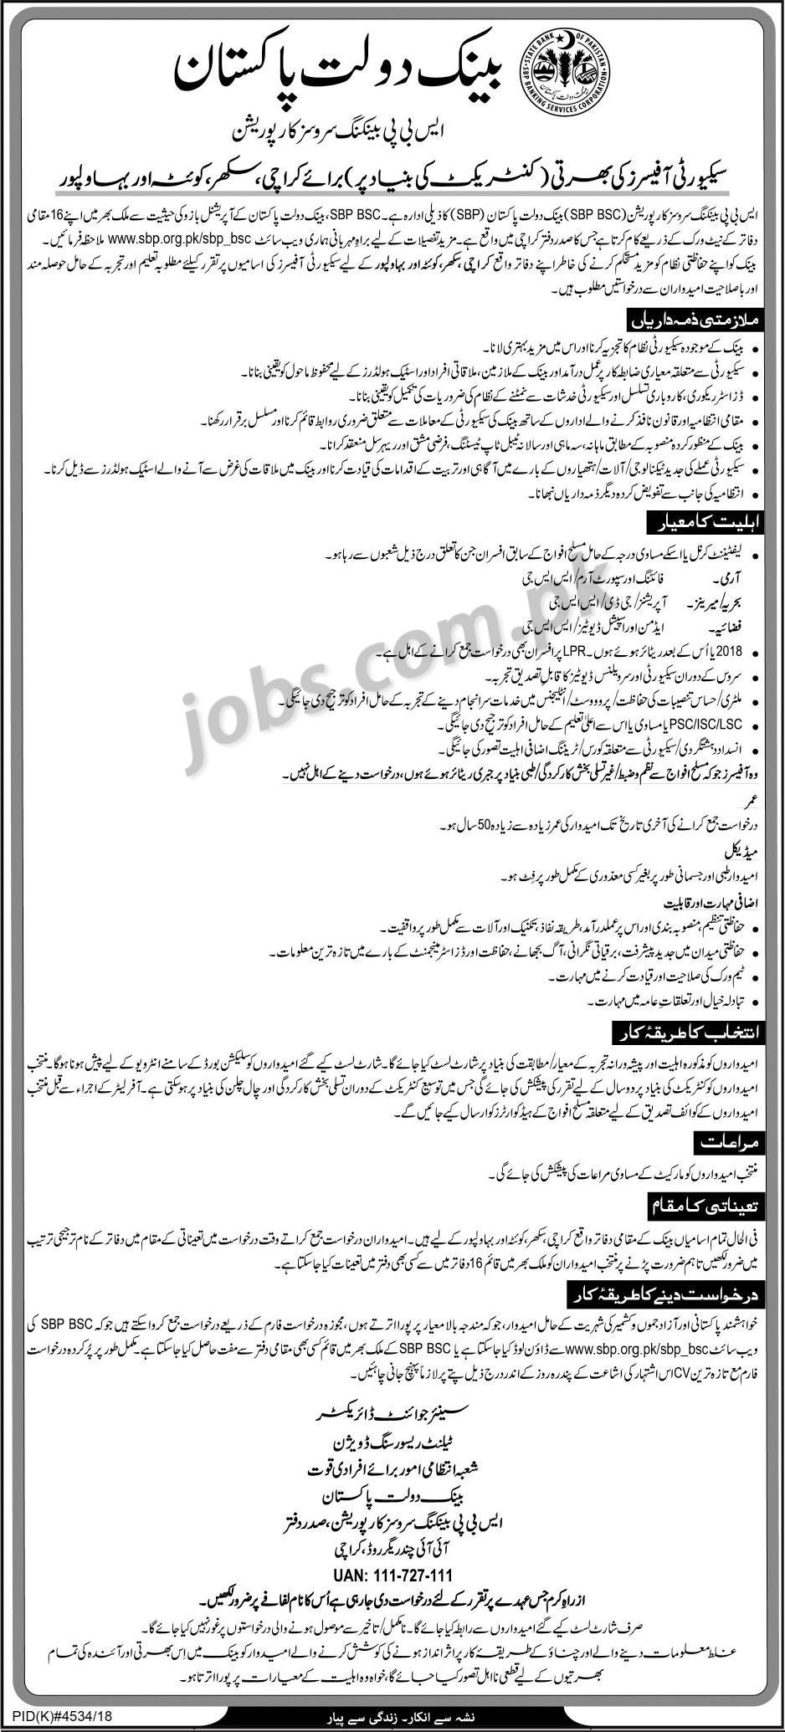 State Bank of Pakistan (SBP) Jobs 2019 for Security Officers (Multiple Cities)